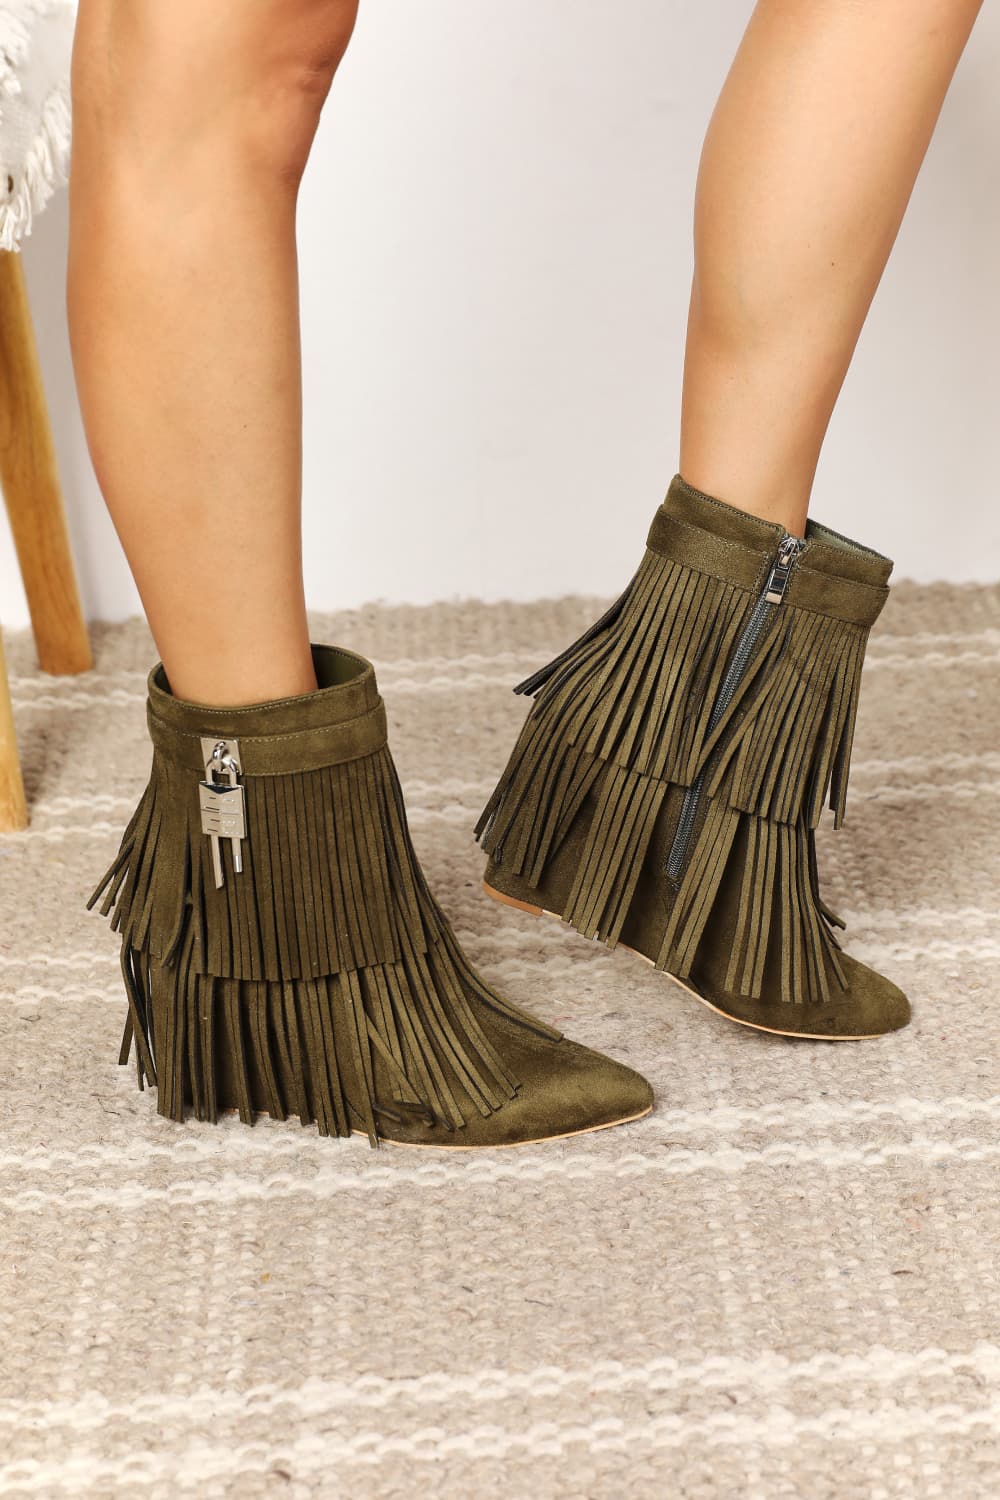 Legend Fringed Wedge Heel Pointy Toe Olive Green Ankle Booties Boots